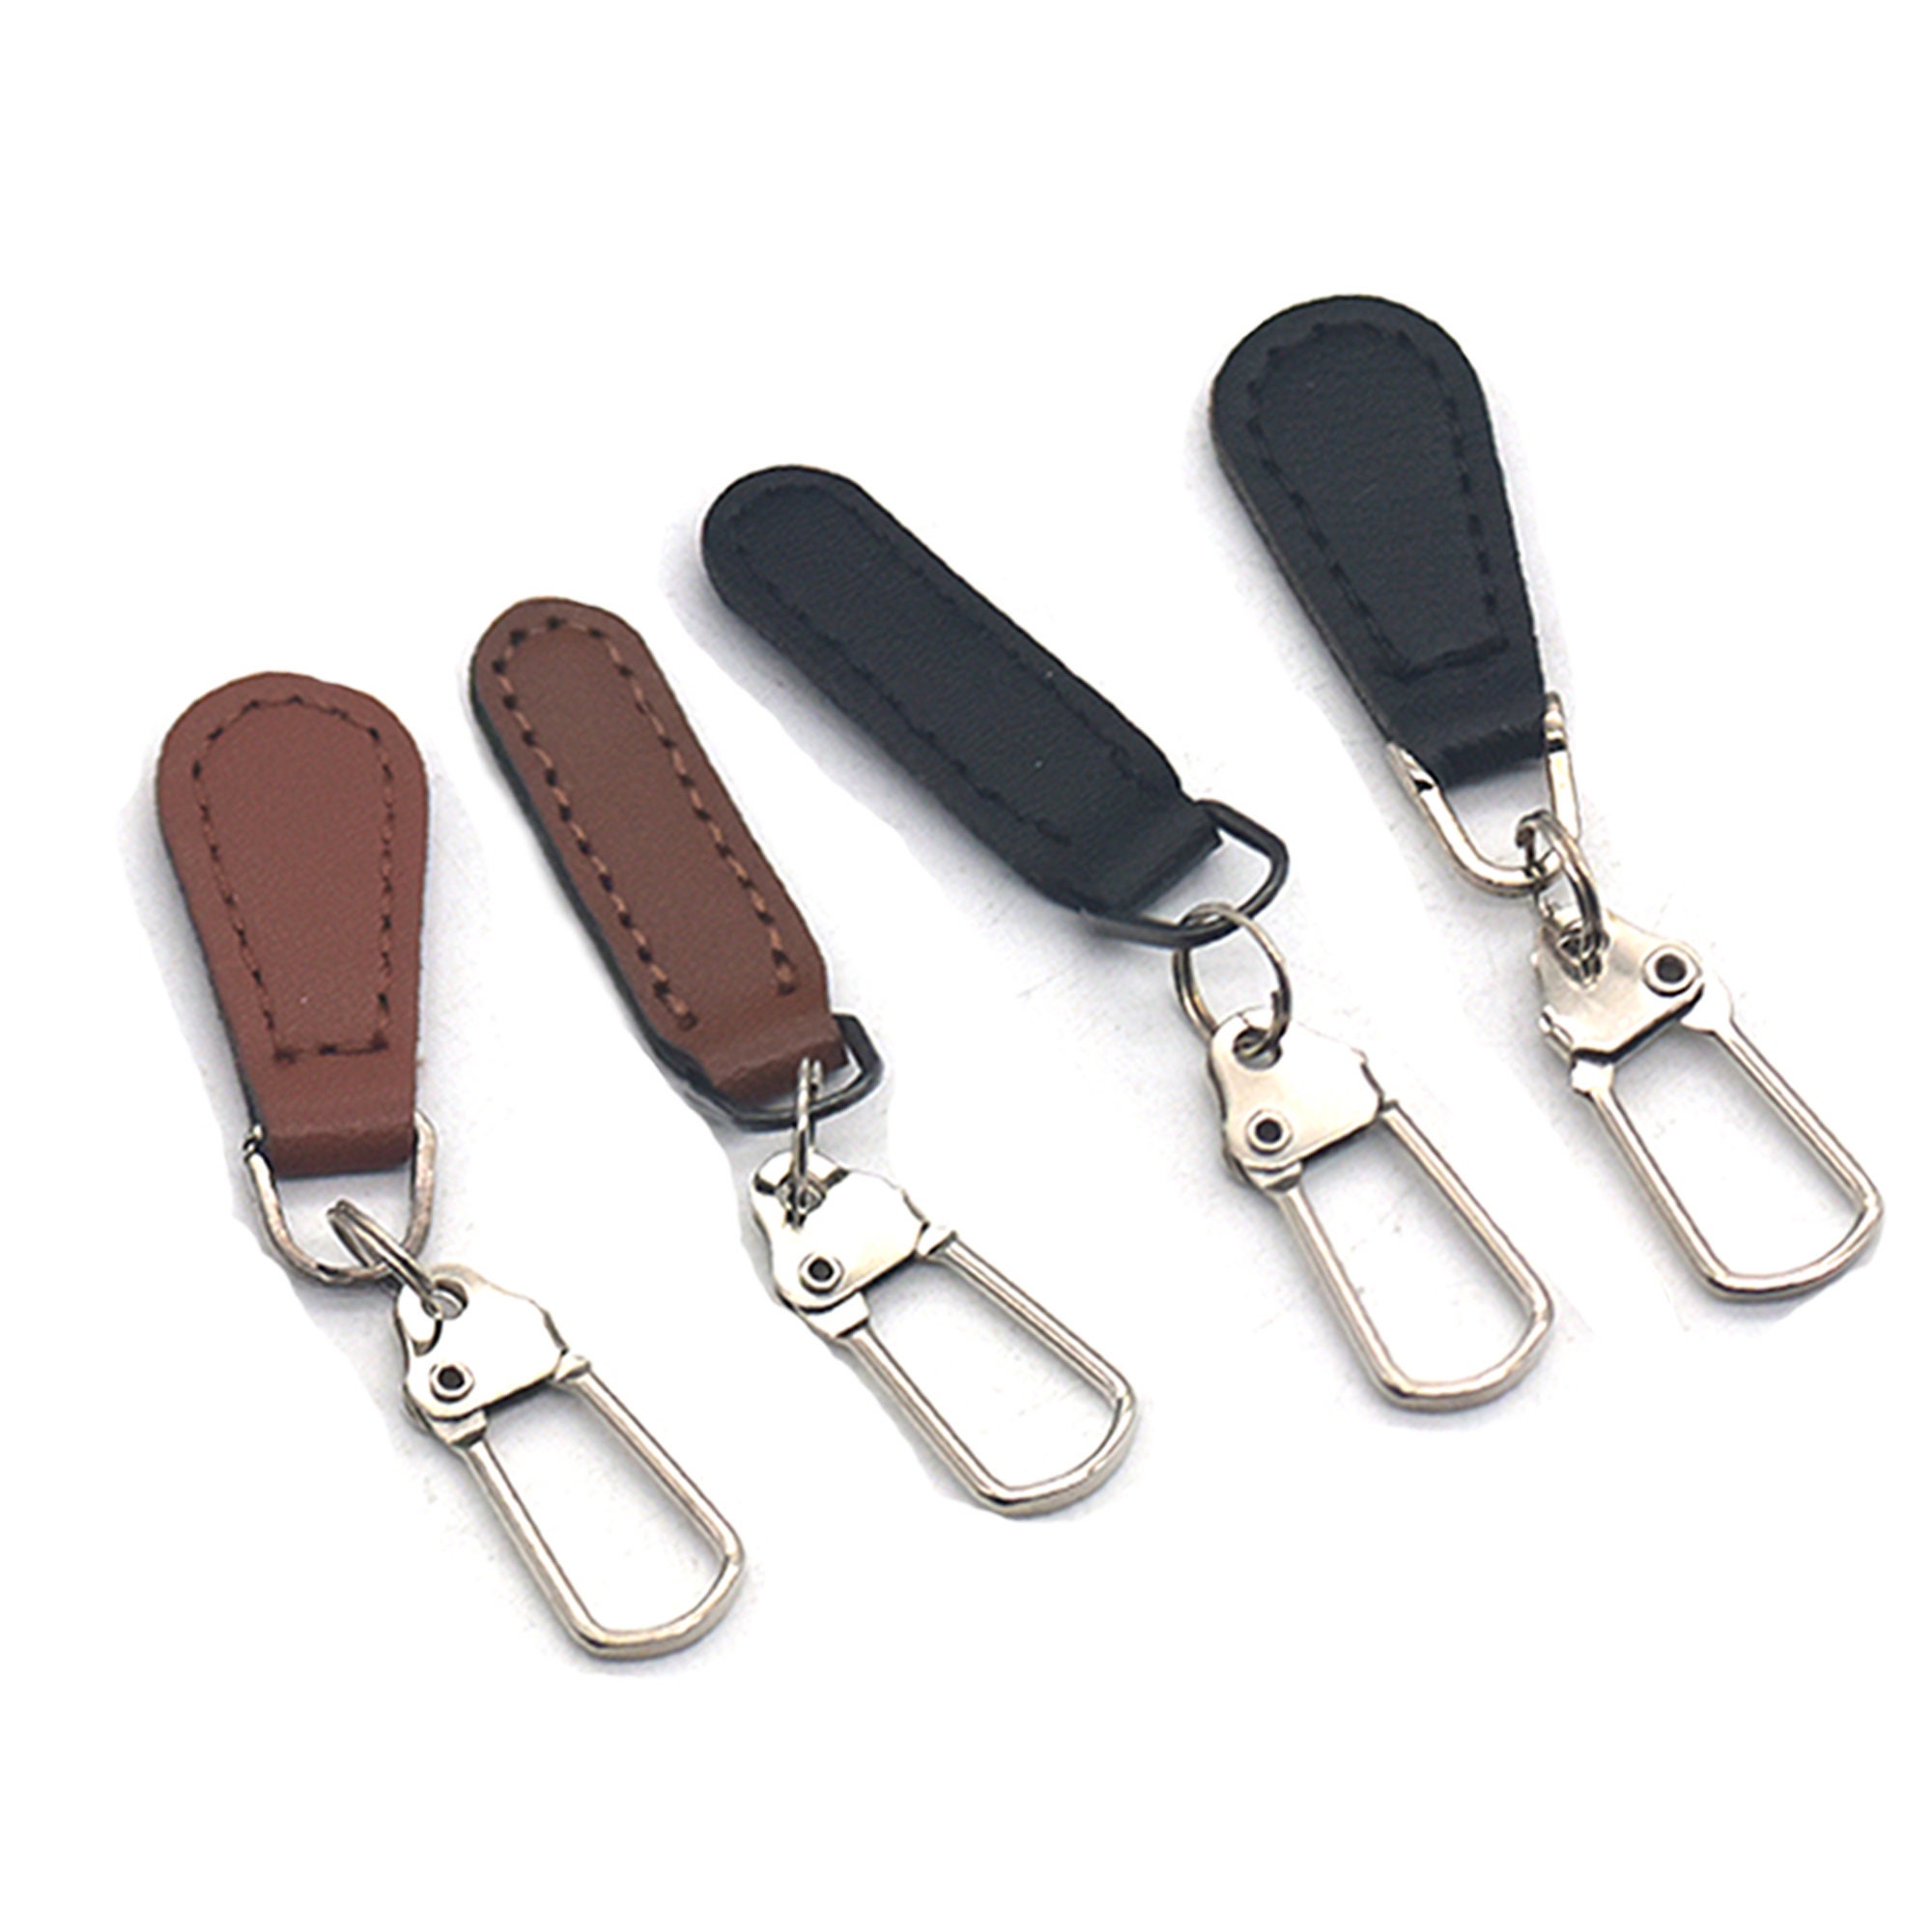 2 5 10 25 Pcs PU Leather Zipper Pull Fixer Replacement for Tab